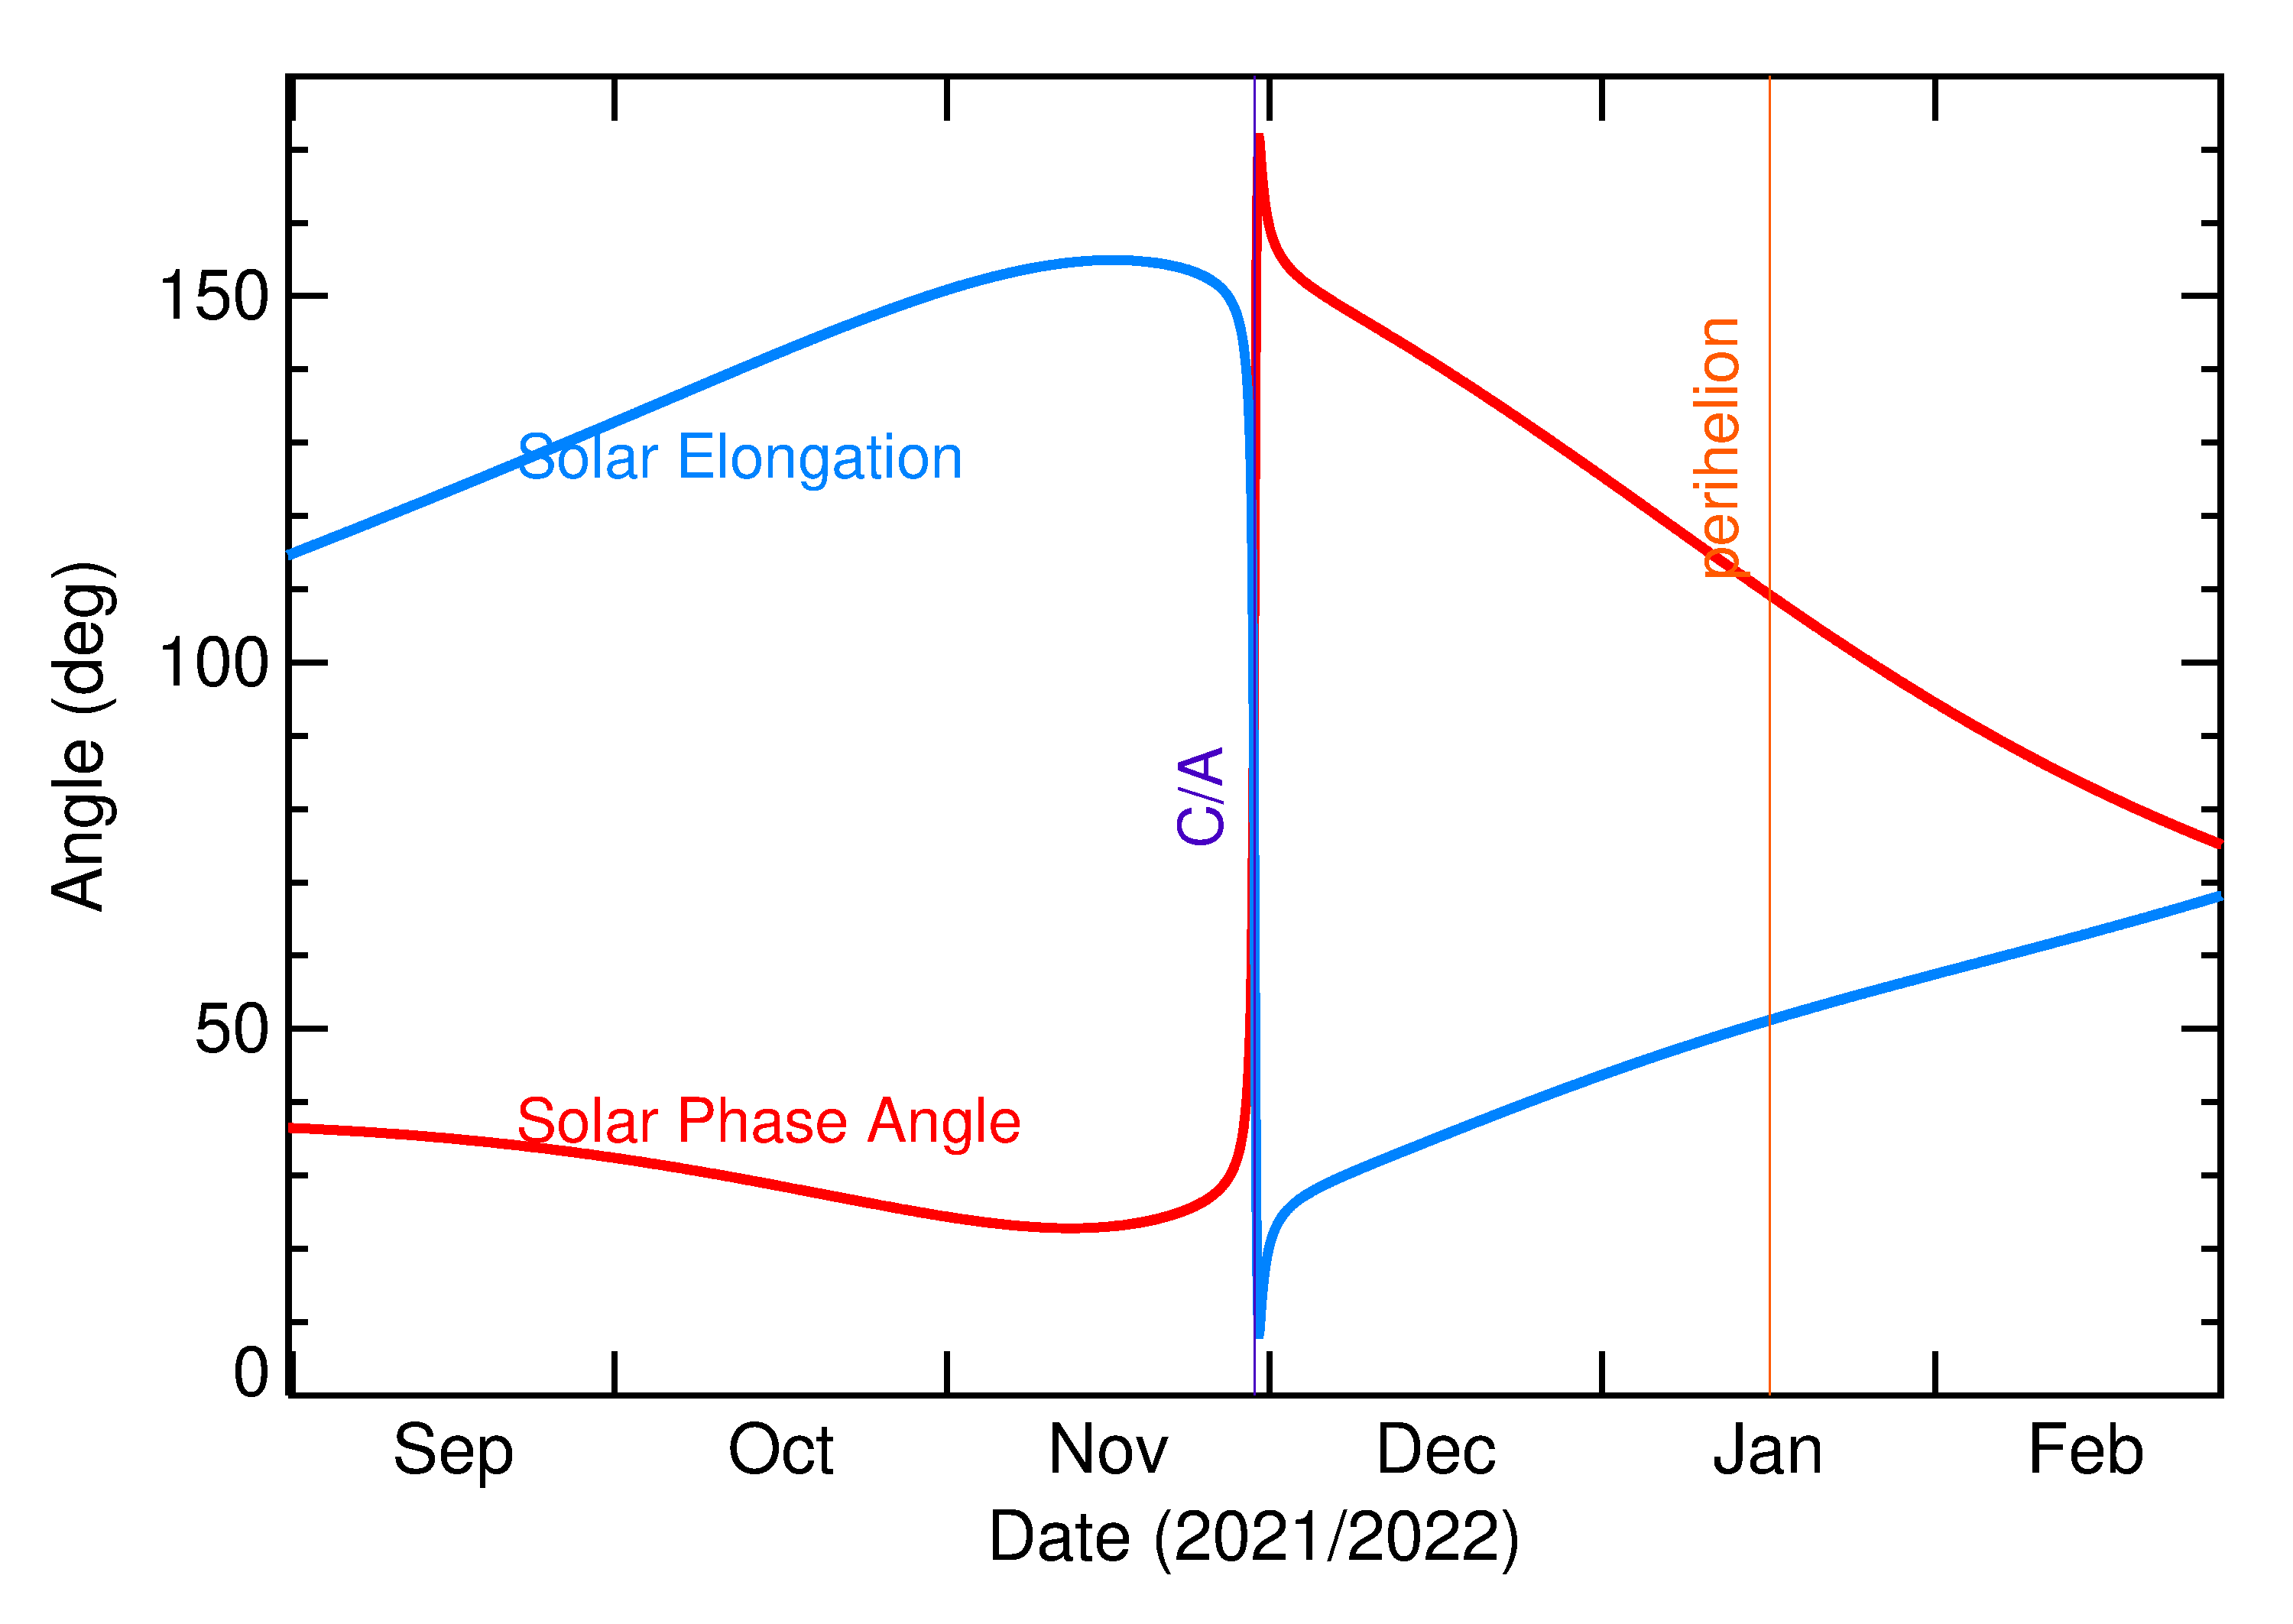 Solar Elongation and Solar Phase Angle of 2021 WC1 in the months around closest approach